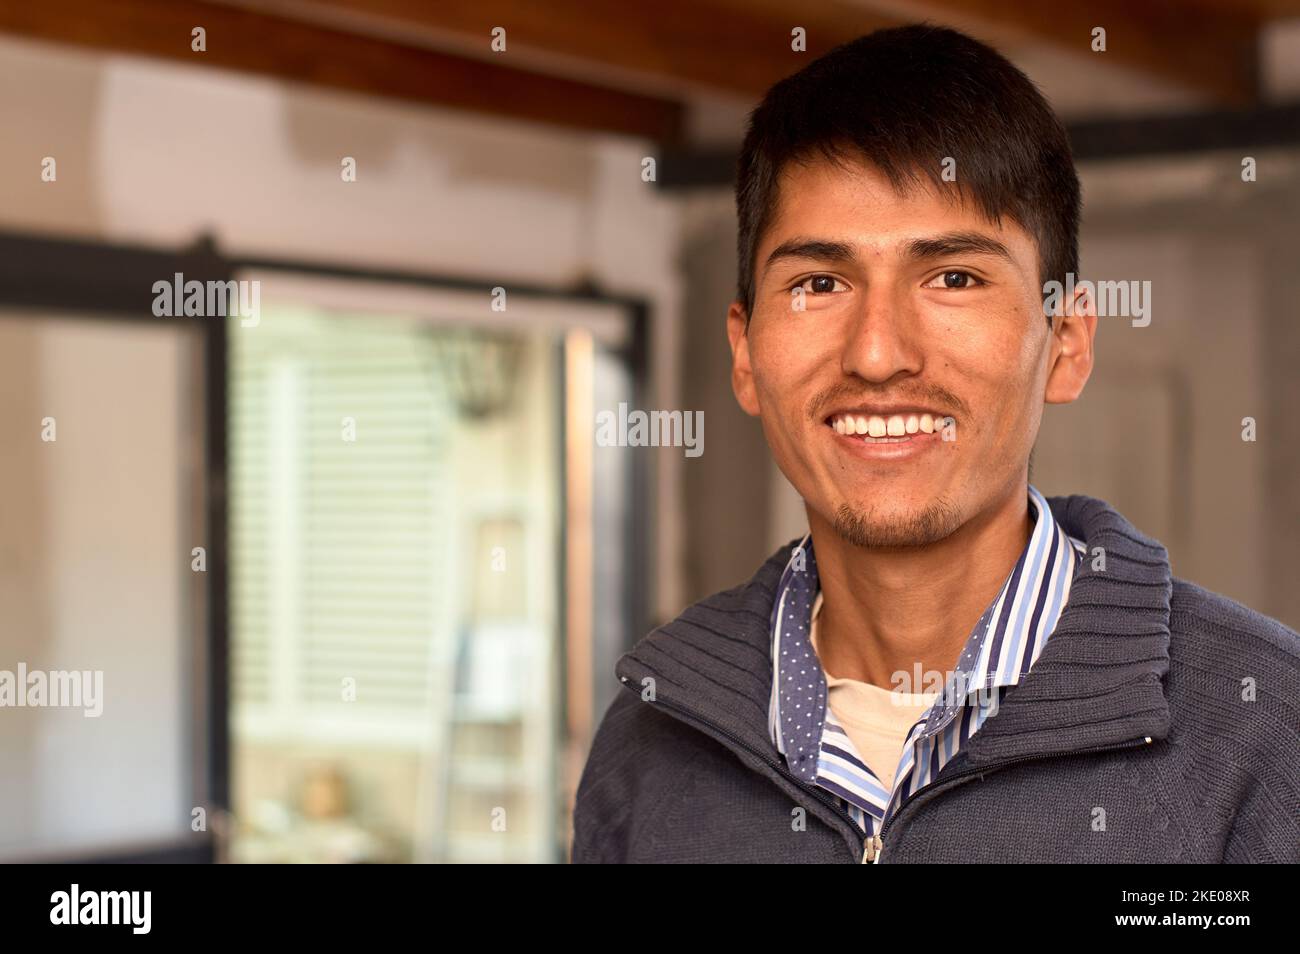 Portrait of a hardworking and honest man Stock Photo